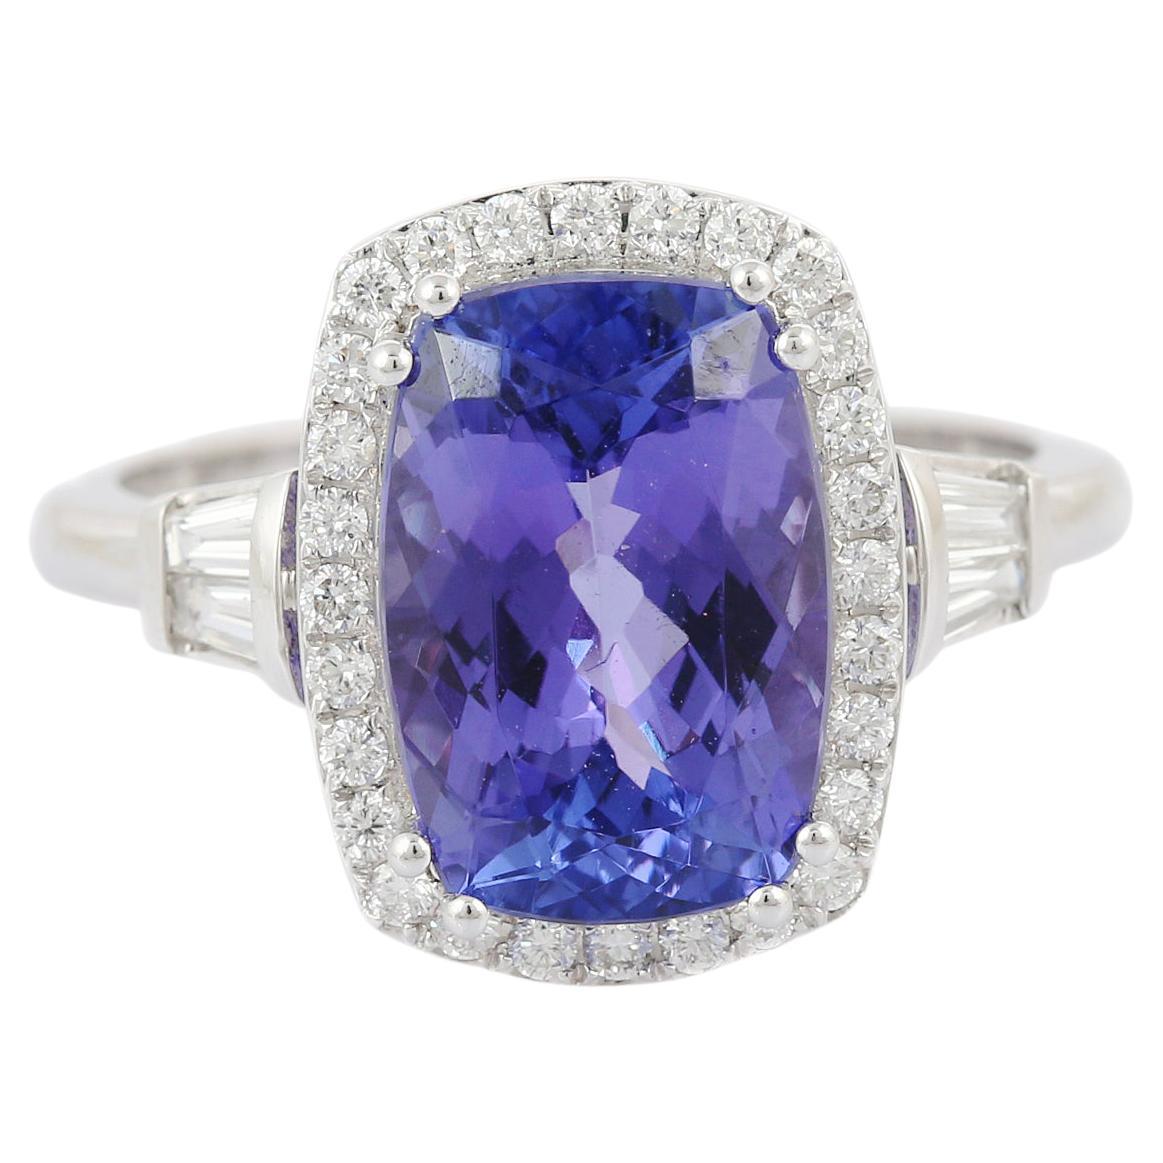 For Sale:  Tanzanite with Diamonds in 18K White Gold Cocktail Ring